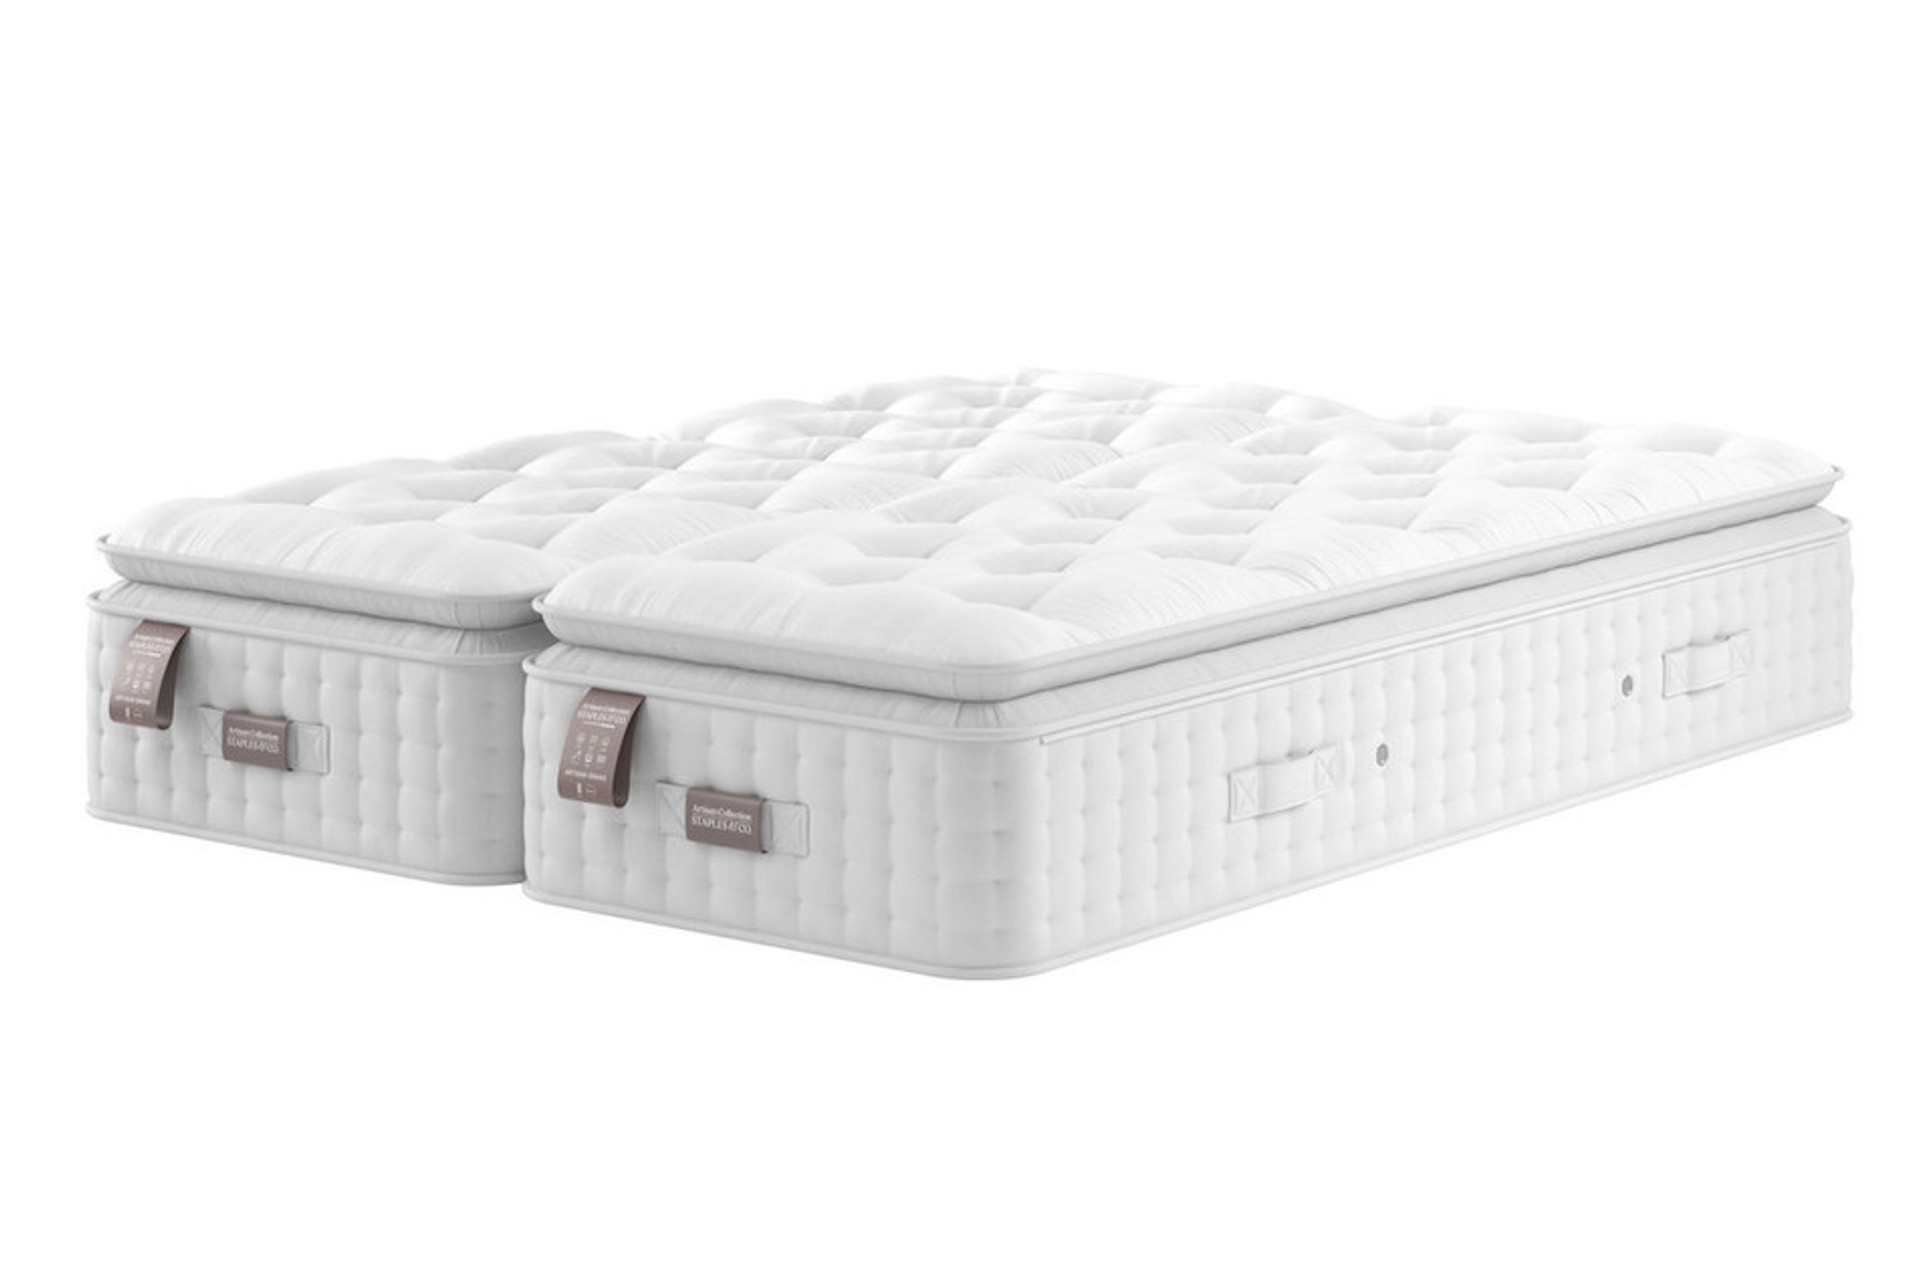 Staples and Co Artisan Grand Zip & Link Mattress for couples